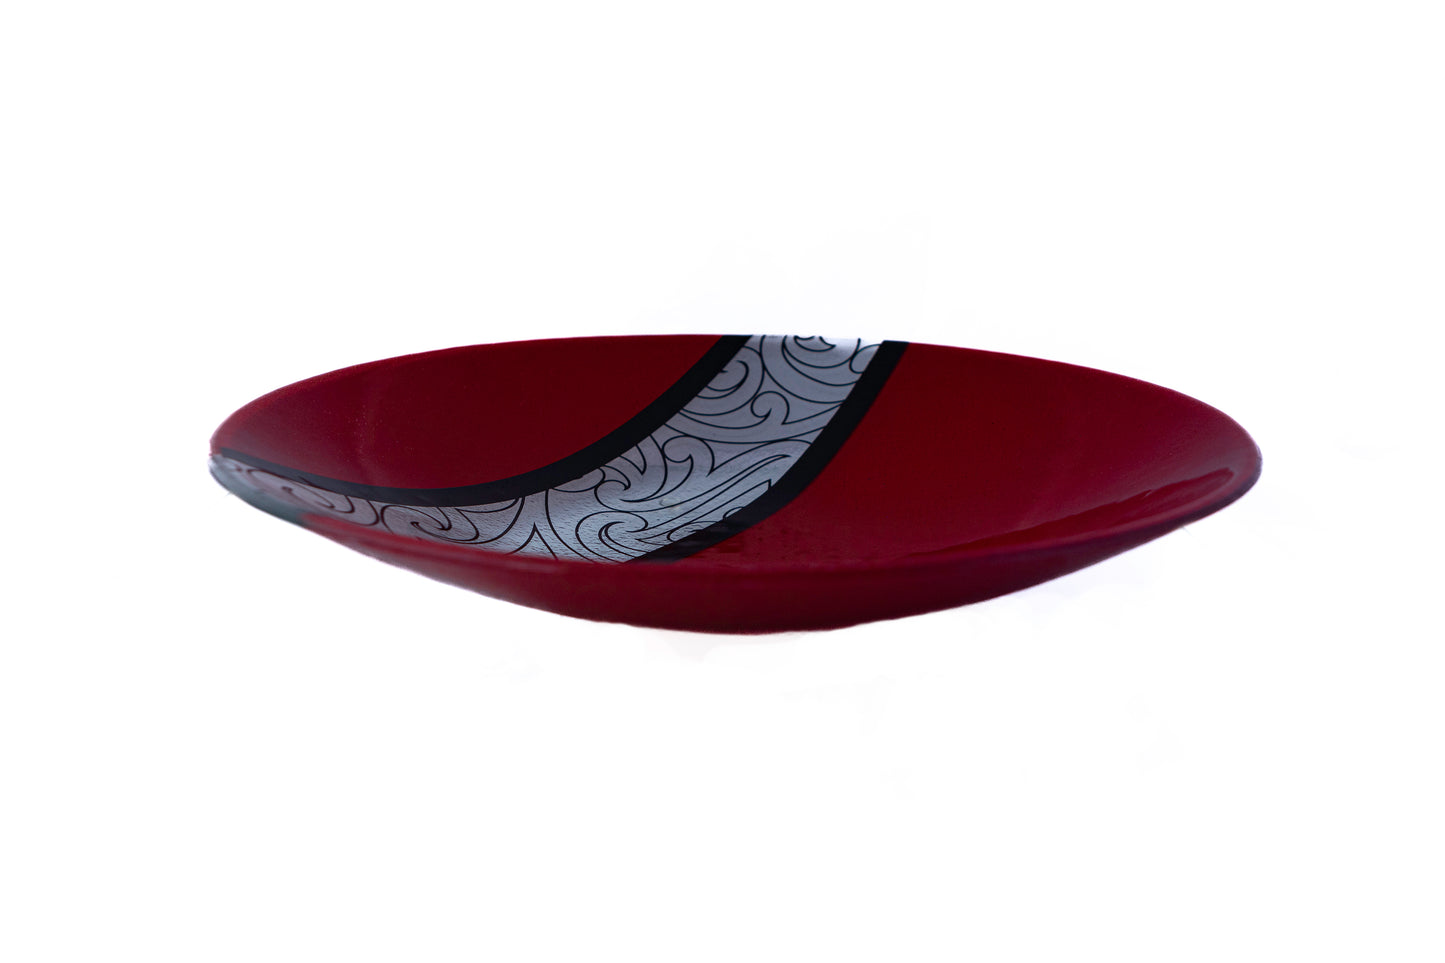 Fused Glass Large Bowl by Maori Boy - Rongo Design (red and black) Silver Fern Gallery